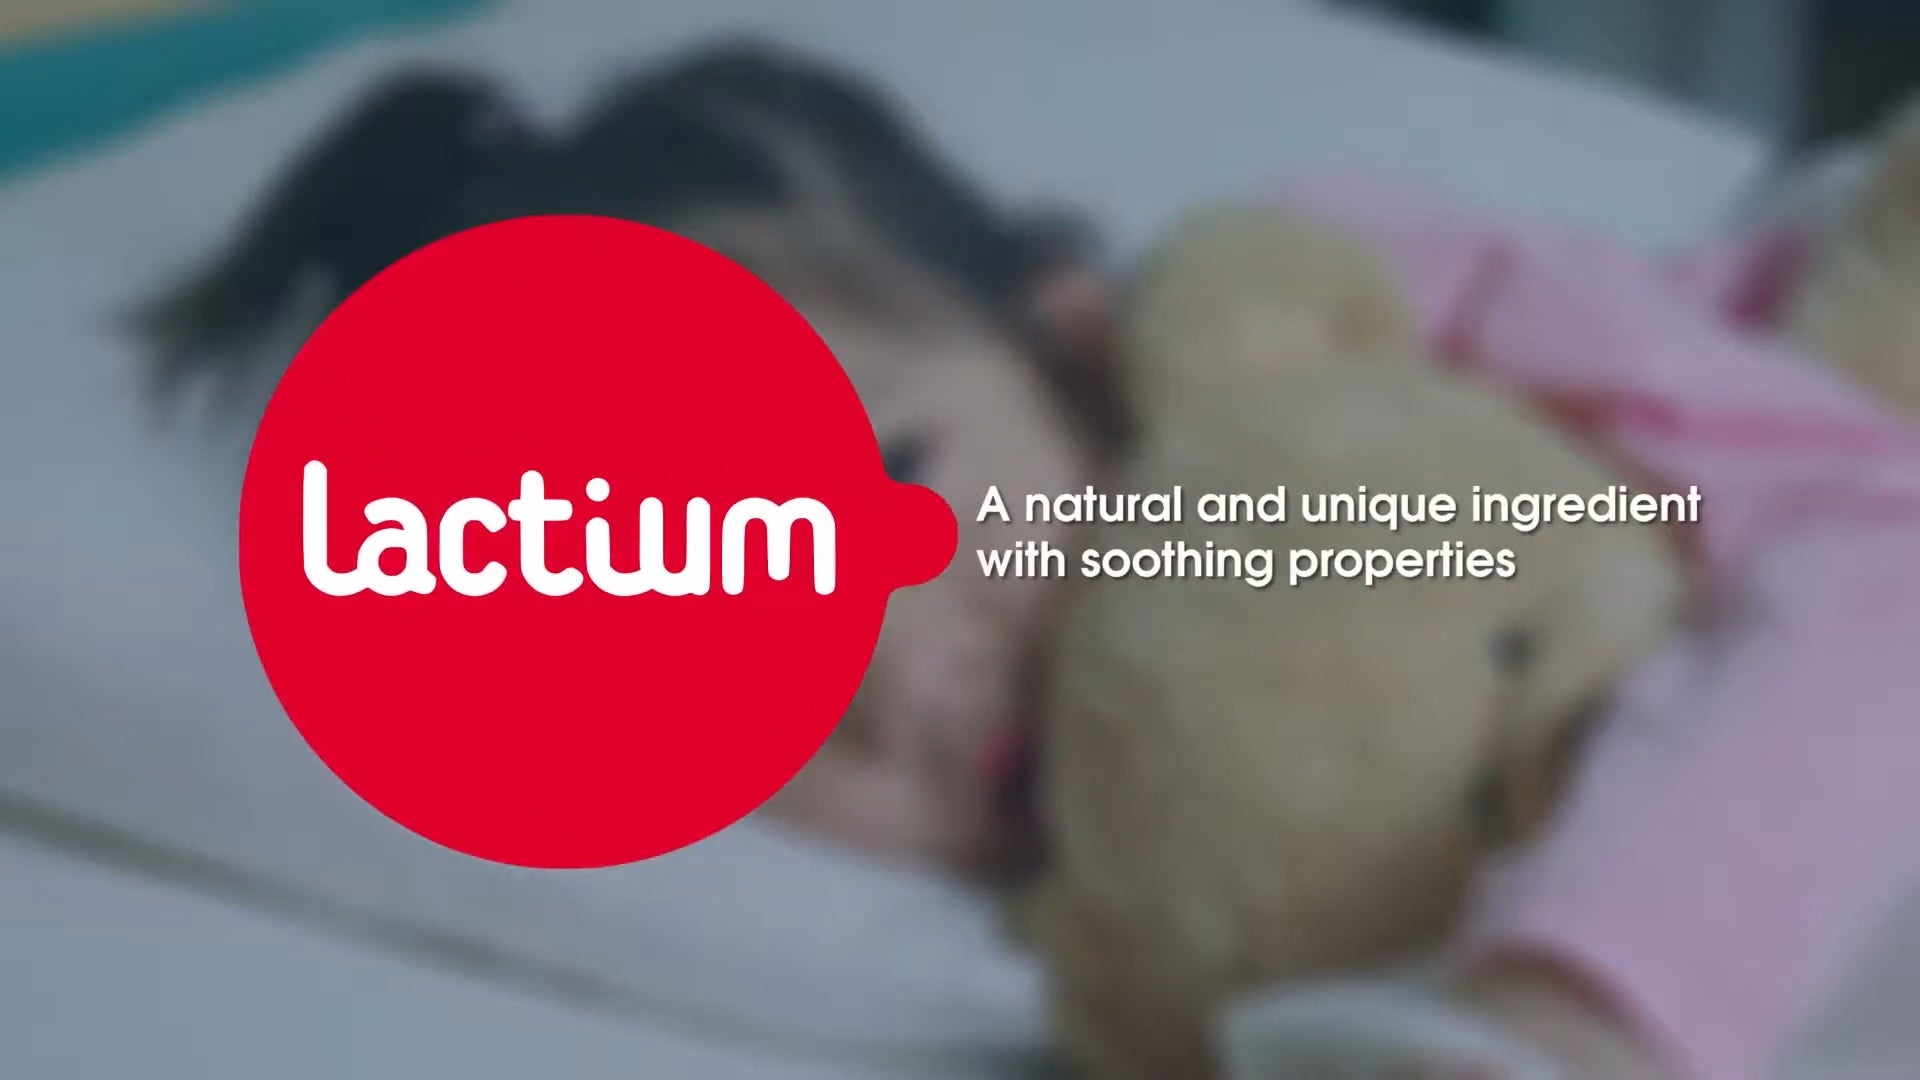 Load video: Lactium - A natural and unique ingredient with soothing properties